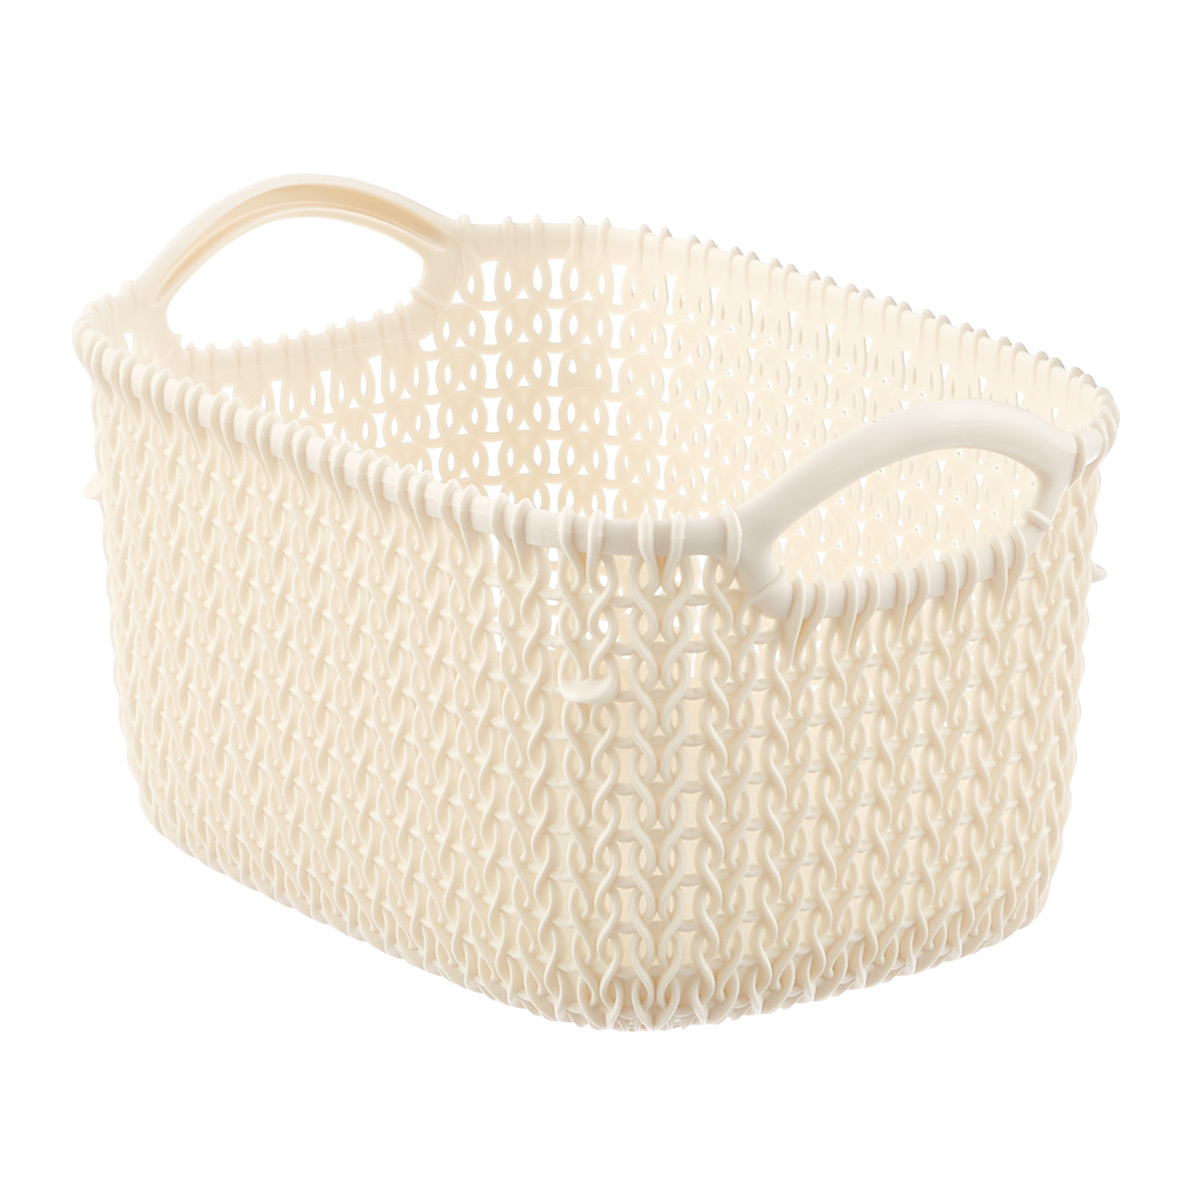 Curver Knit Storage Baskets | The Container Store